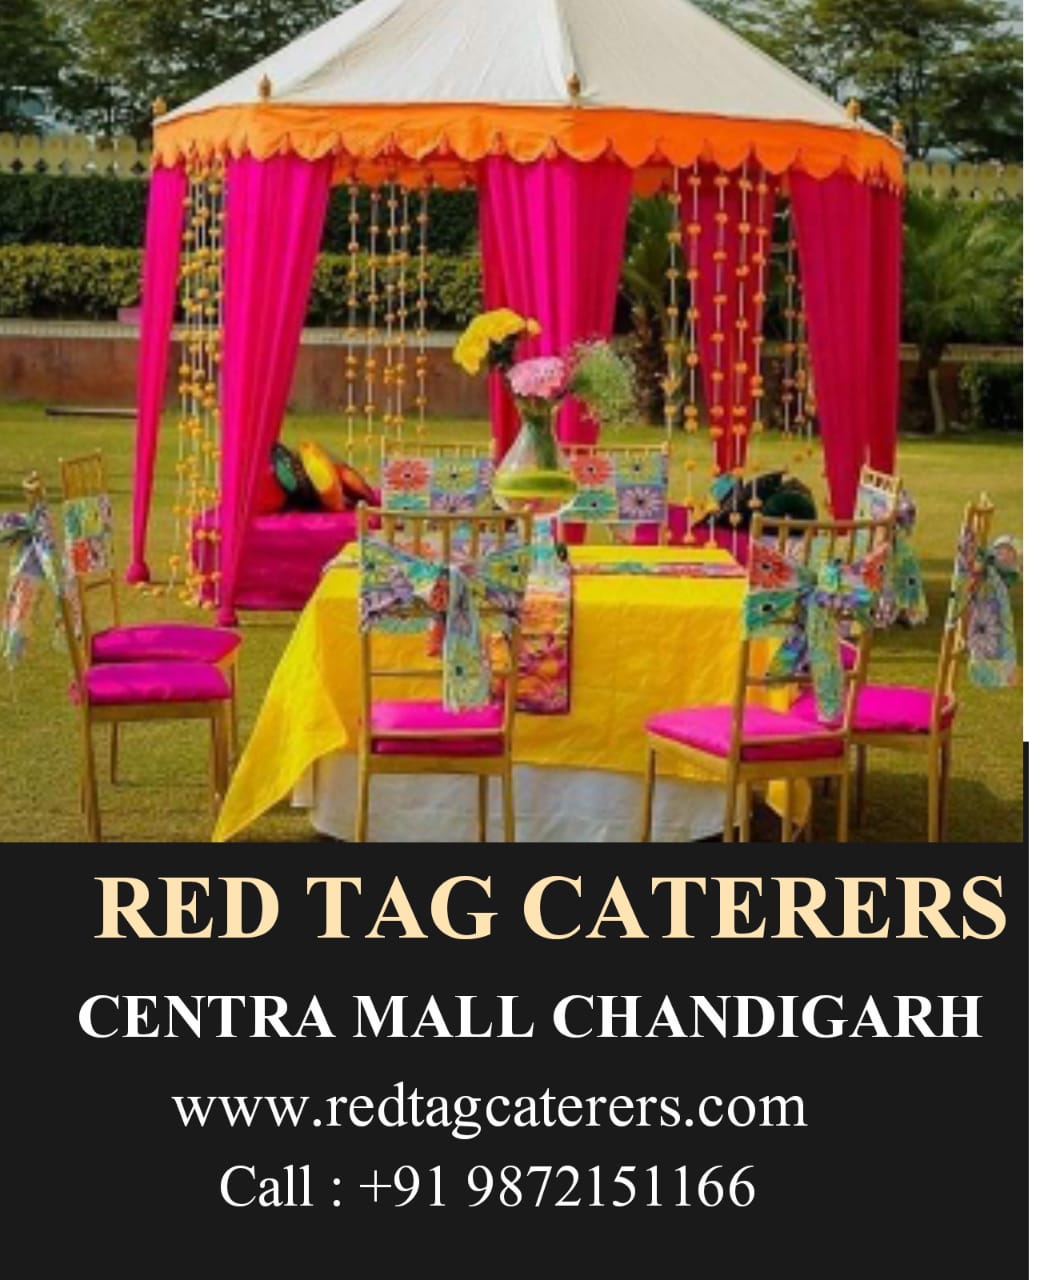 Best Caterer And Event Management Company In Chandigarh Red Tag